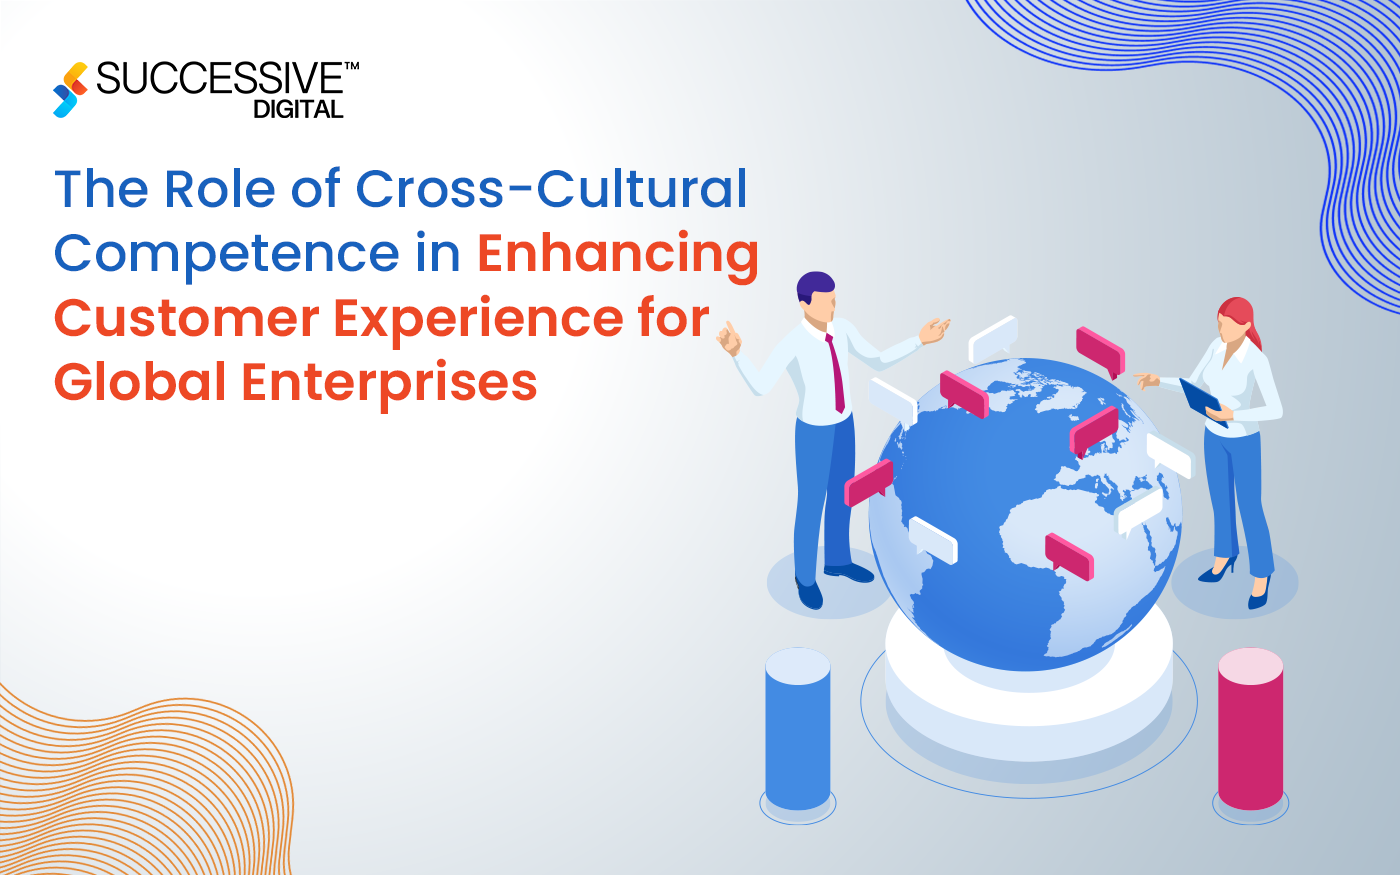 The Role of Cross-Cultural Competence in Enhancing Customer Experience for Global Enterprises